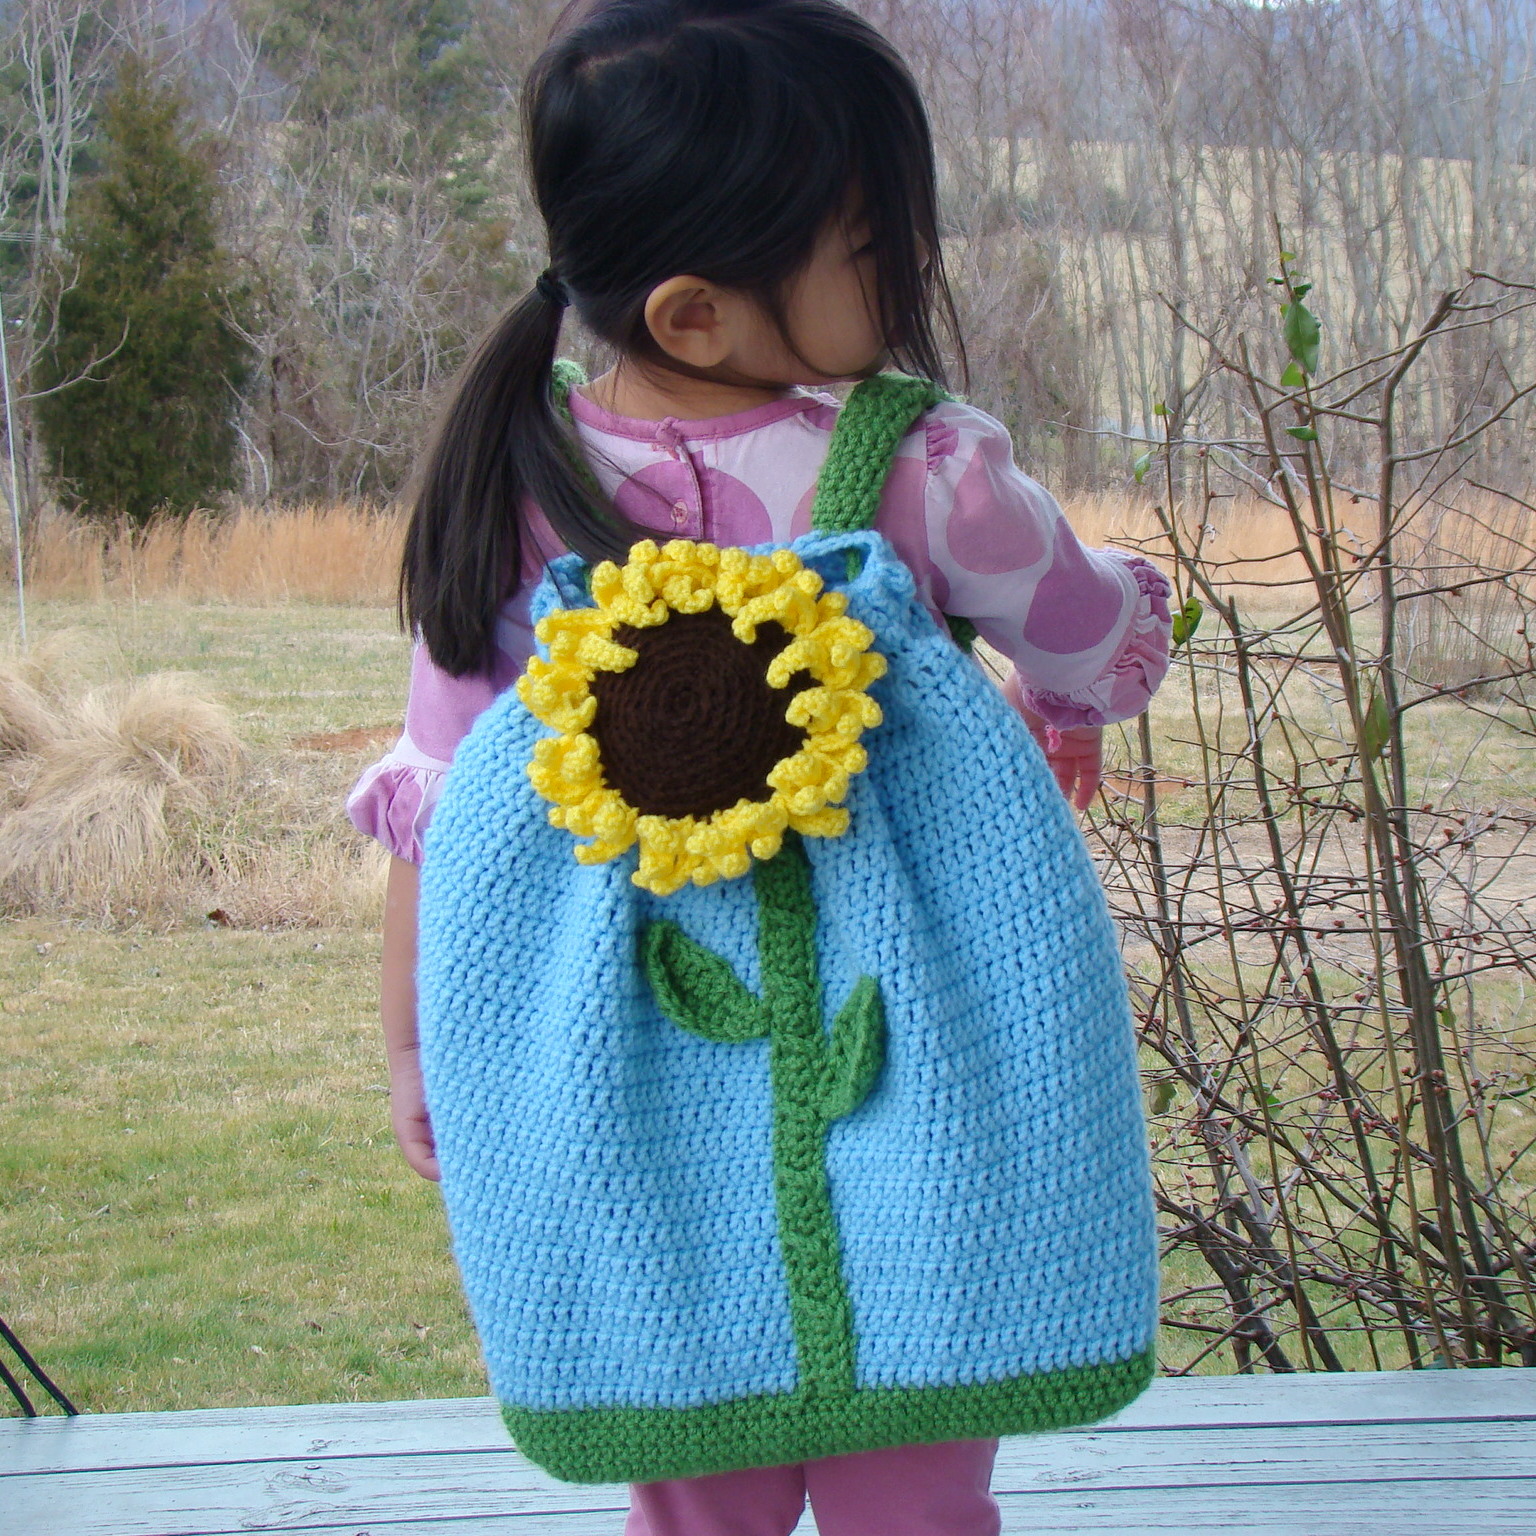 A small child, back to the camera, wearing a handmade crocheted blue backpack with a large sunflower on it.